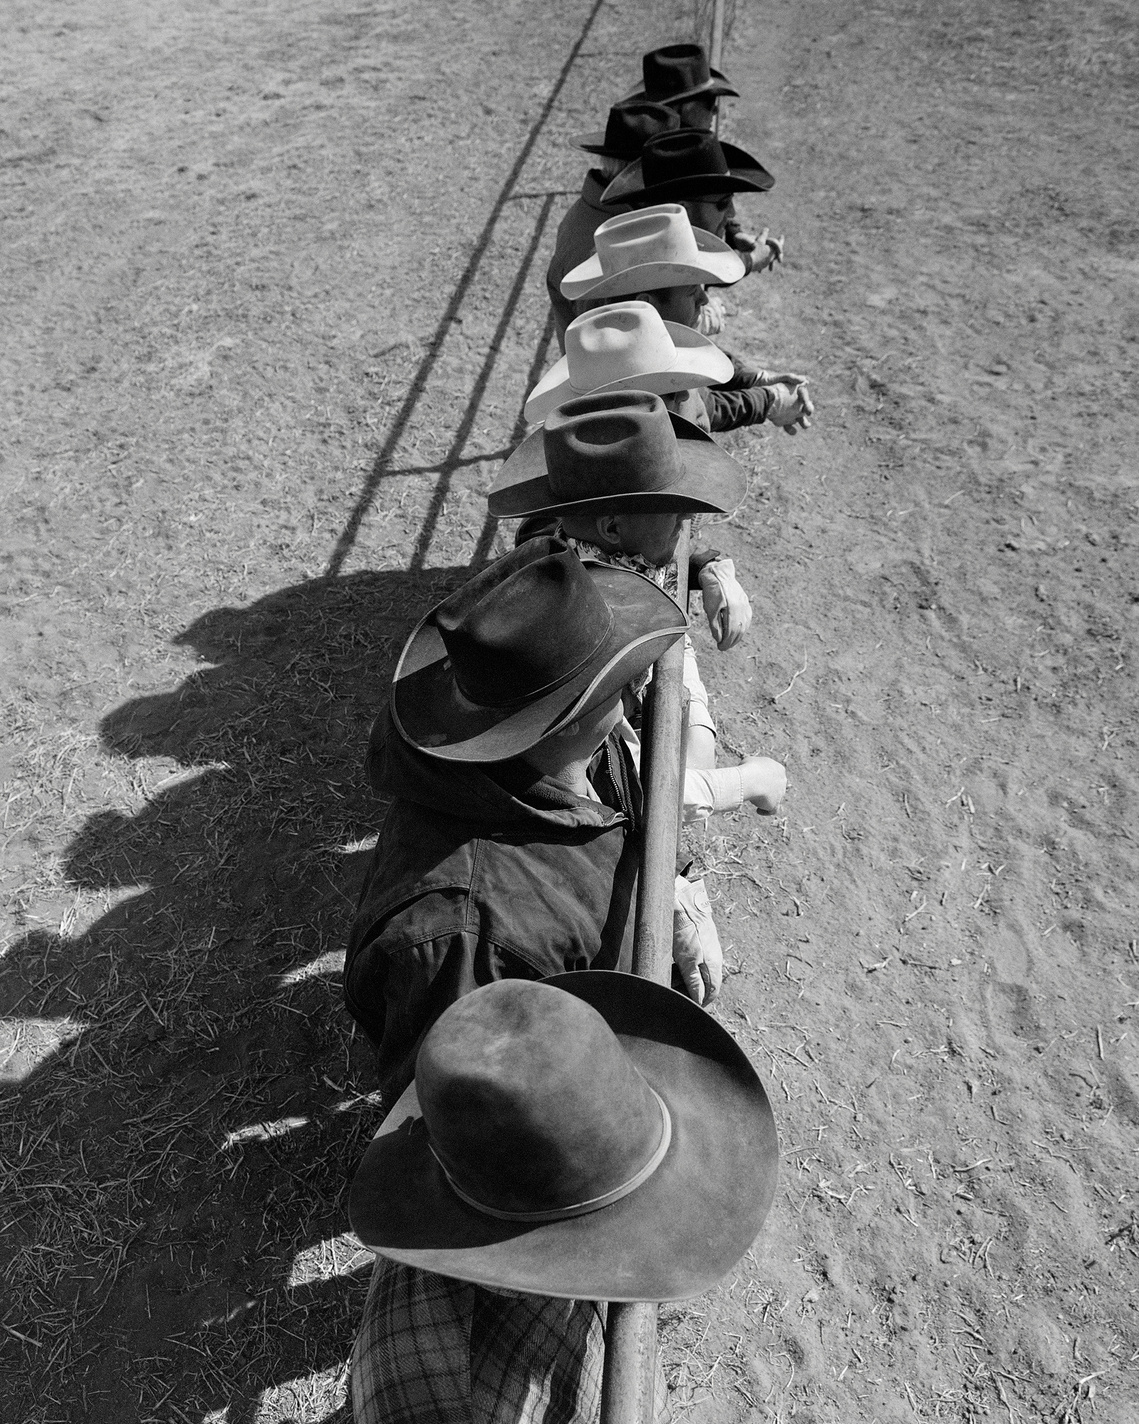 Fine art photograph of cowboys in Texas. Western artwork of cowboys working on a cattle ranch in Marfa, Texas. A Day In Texas artwork.